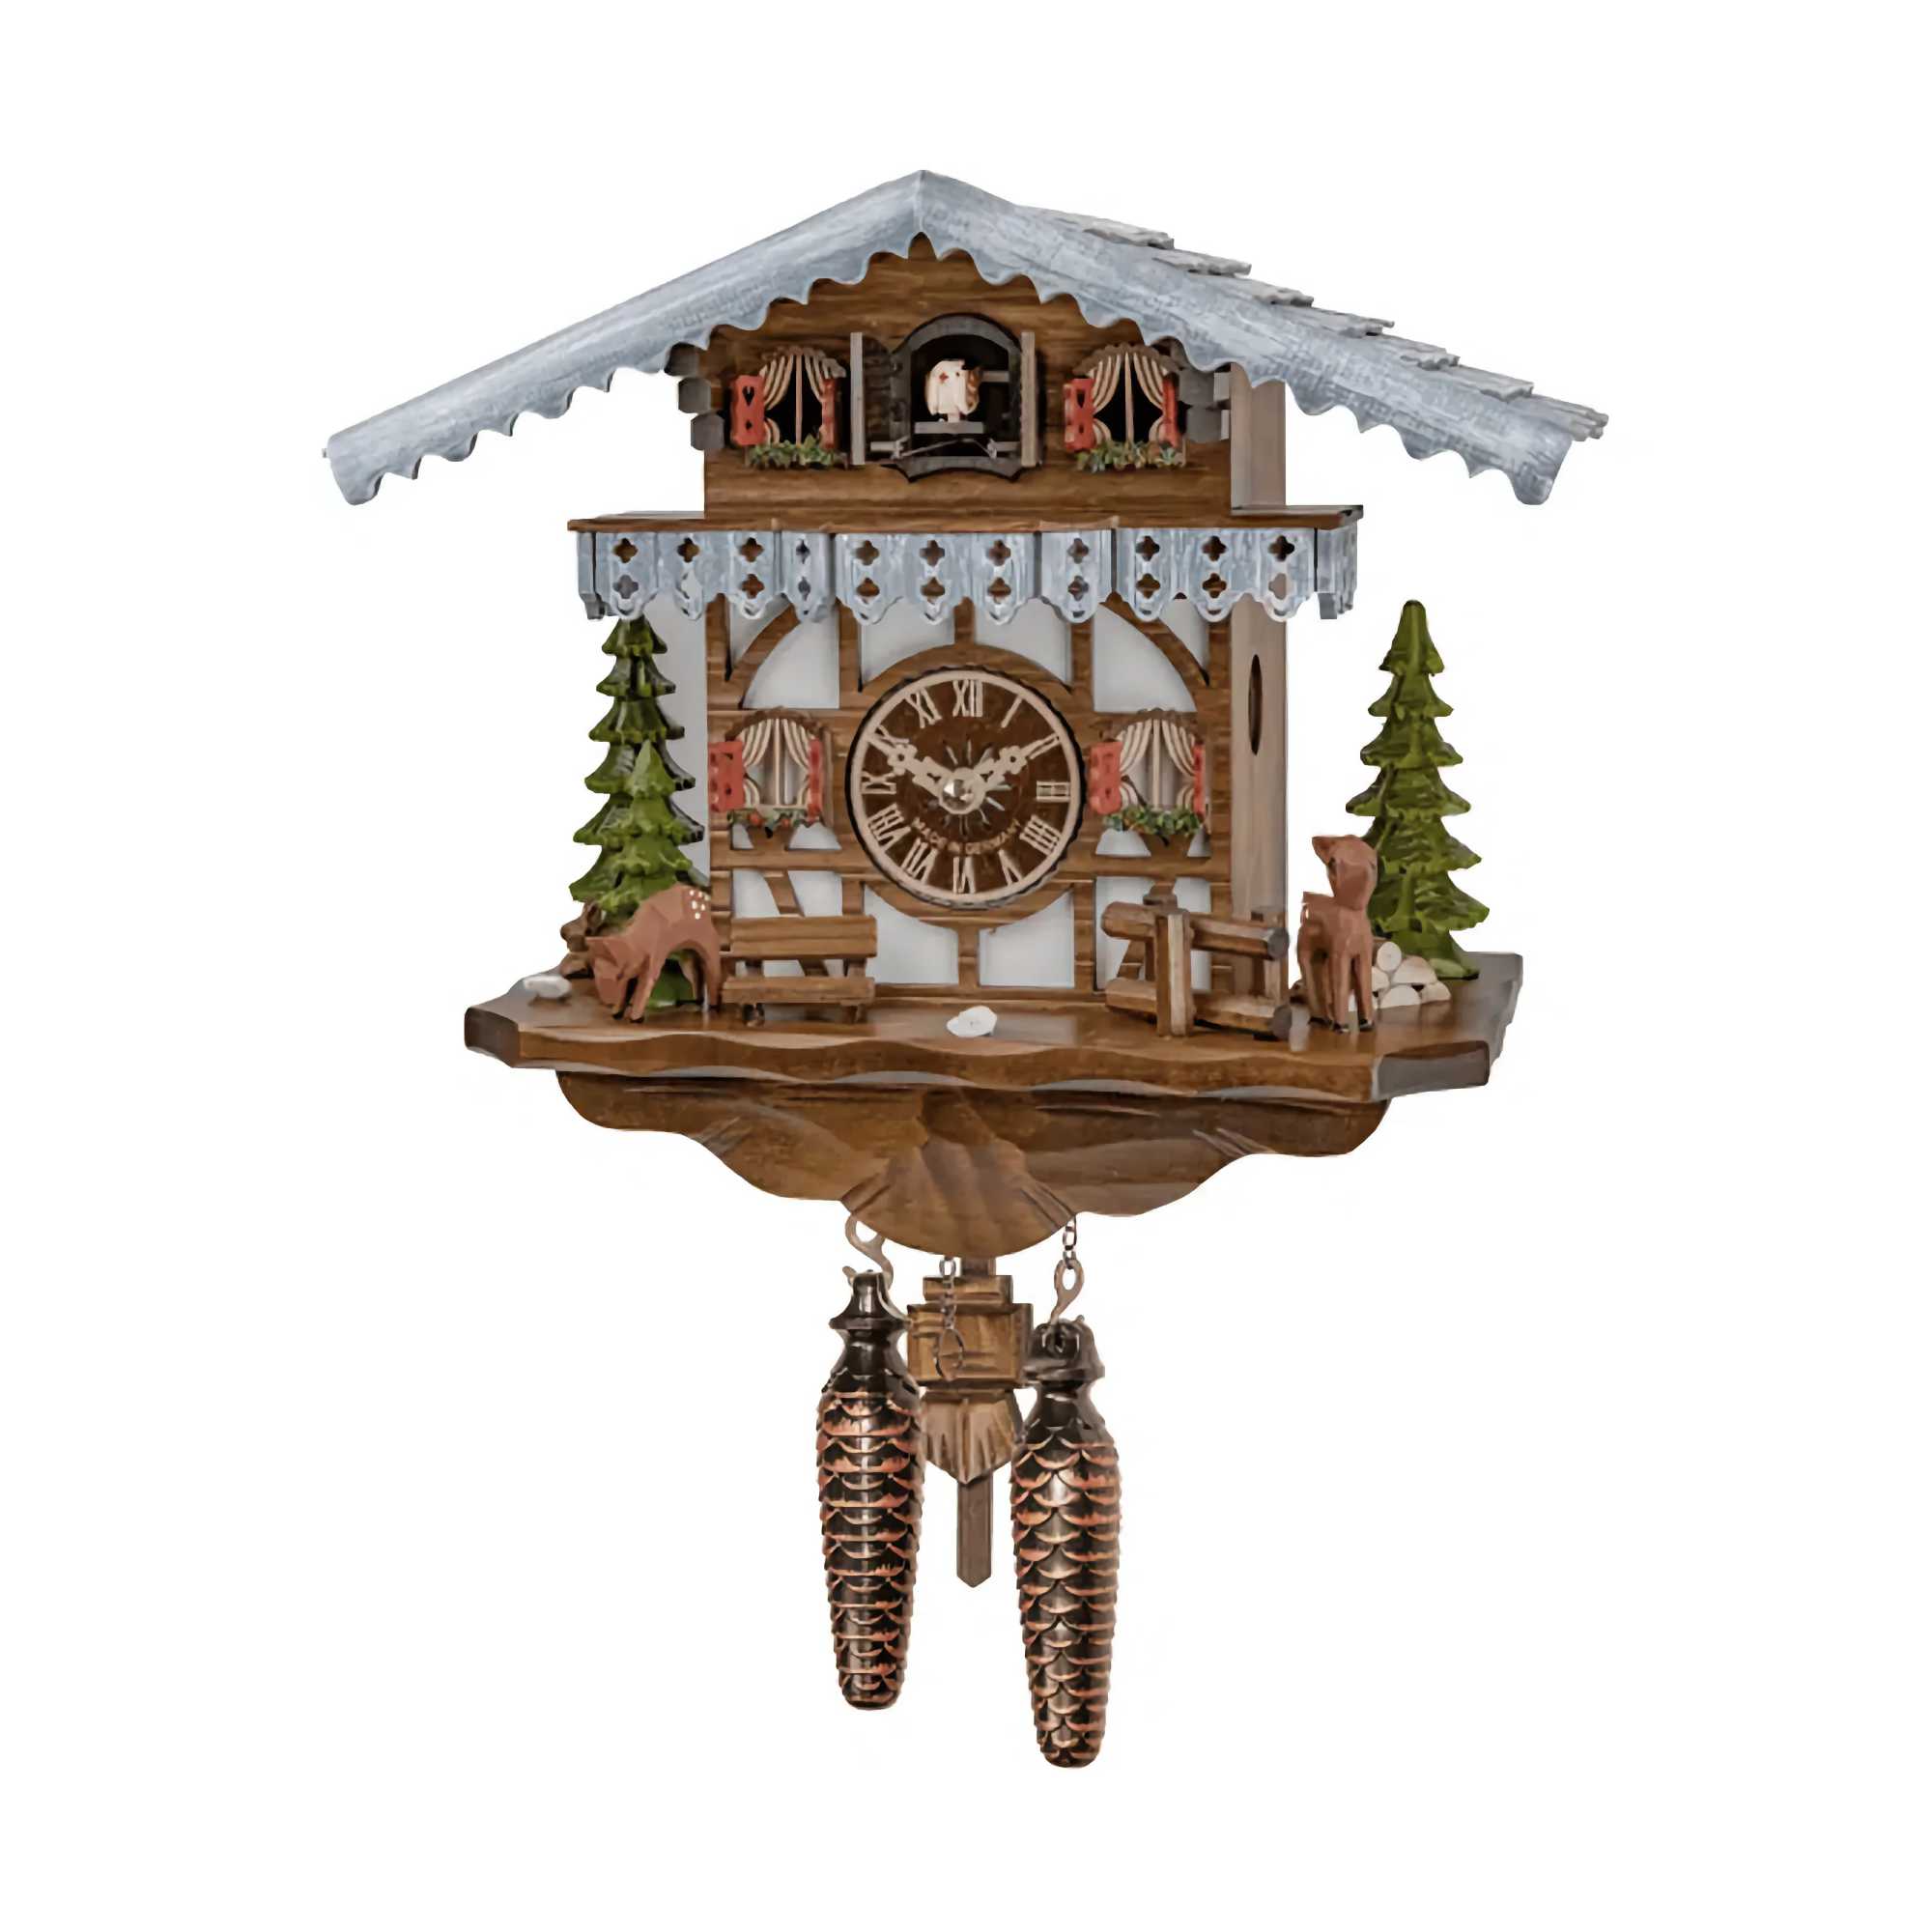 Engstler Cuckoo Clock with Snow-covered Roof